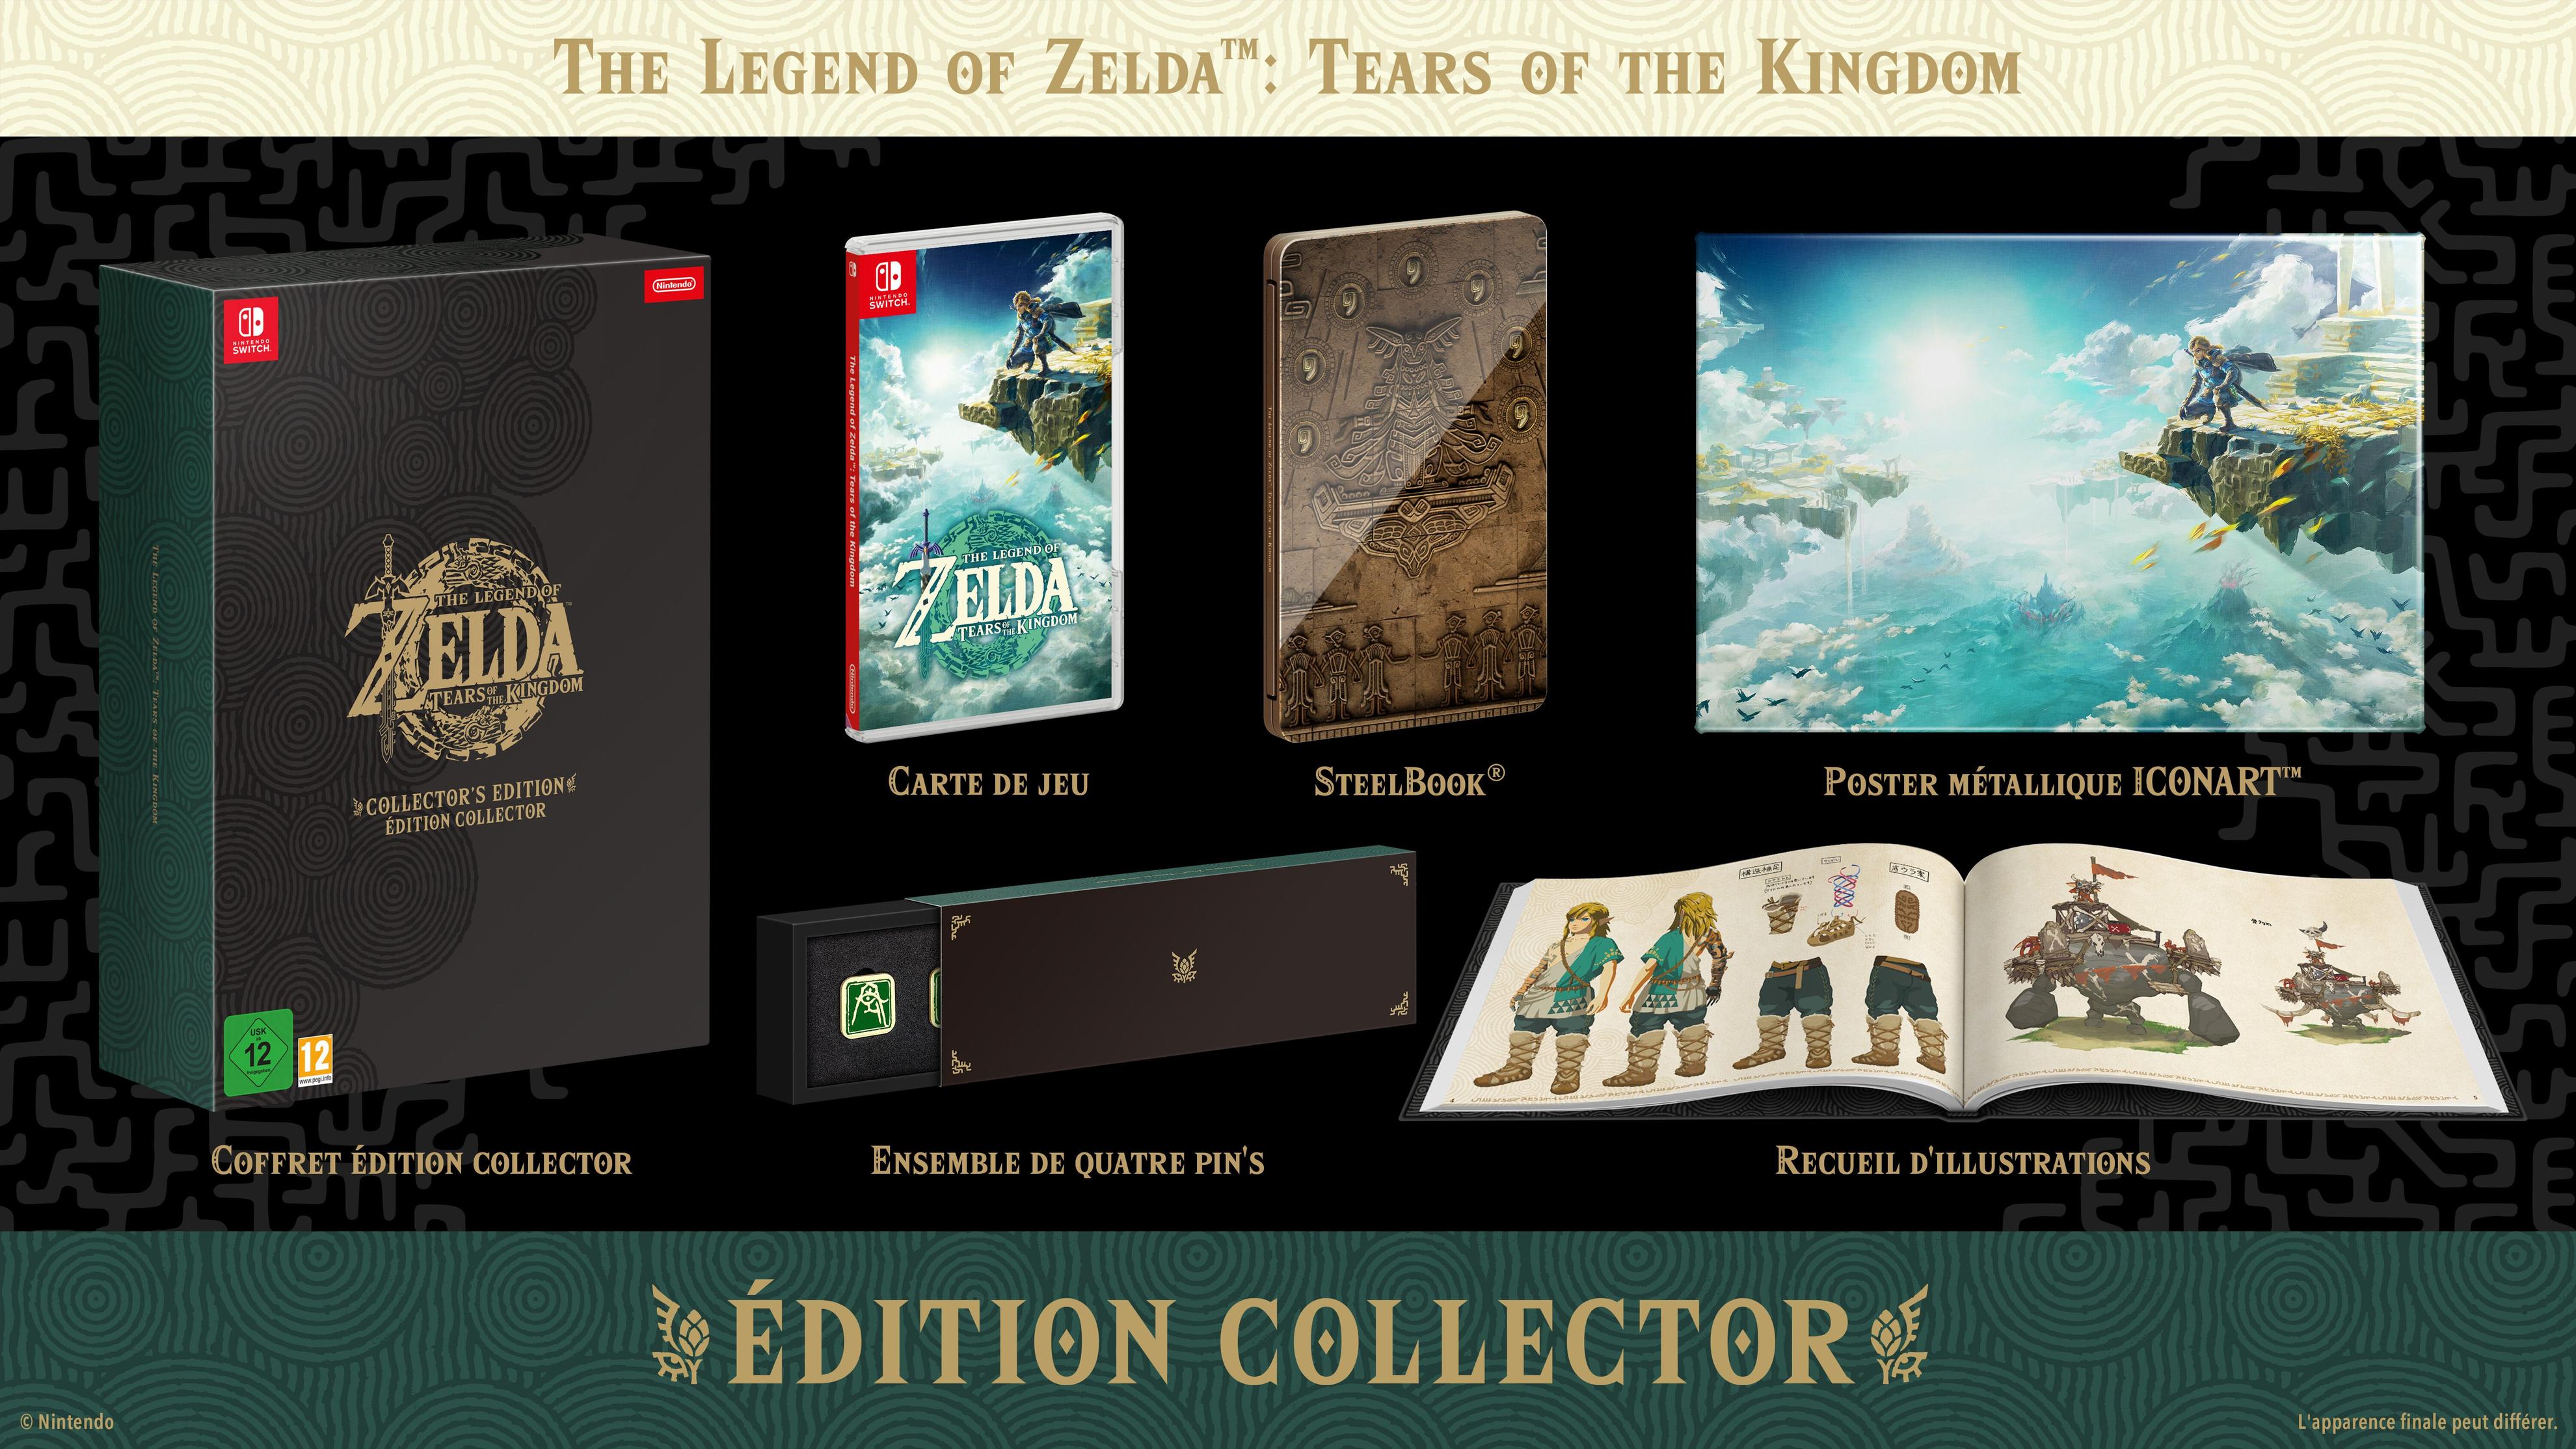 The Legend Of Zelda Tears Of The Kingdom Edition Collector offre à 149,99€ sur Micromania